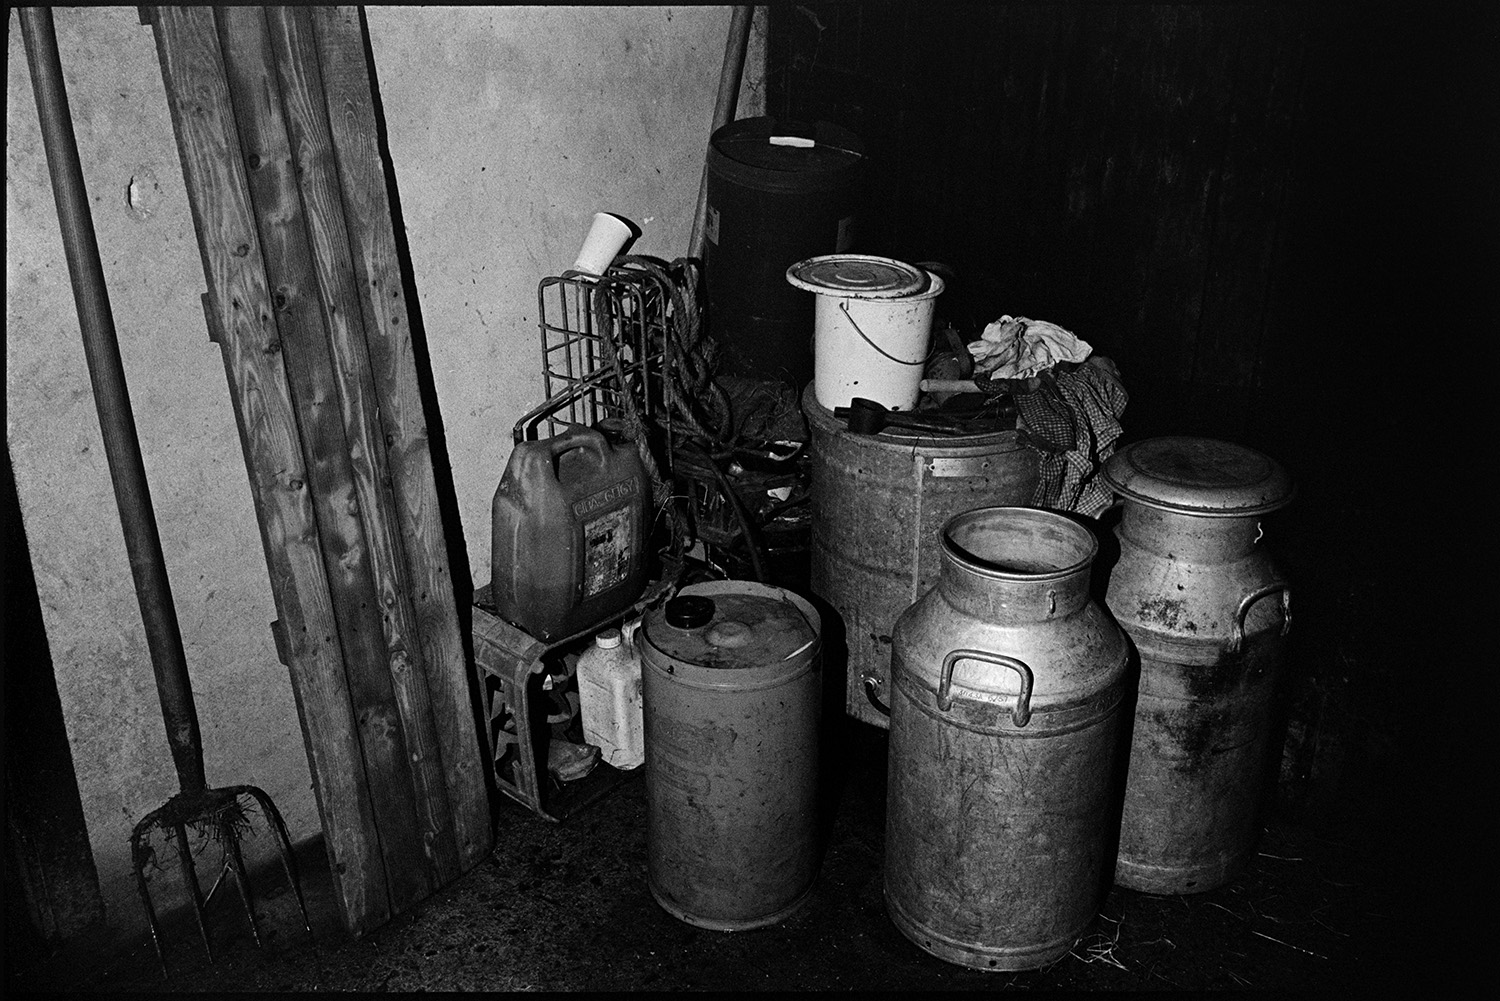 Milk churns, a fork and plastic contained amongst other items stored in a shed or barn at Jeffrys Farm, Beaford.